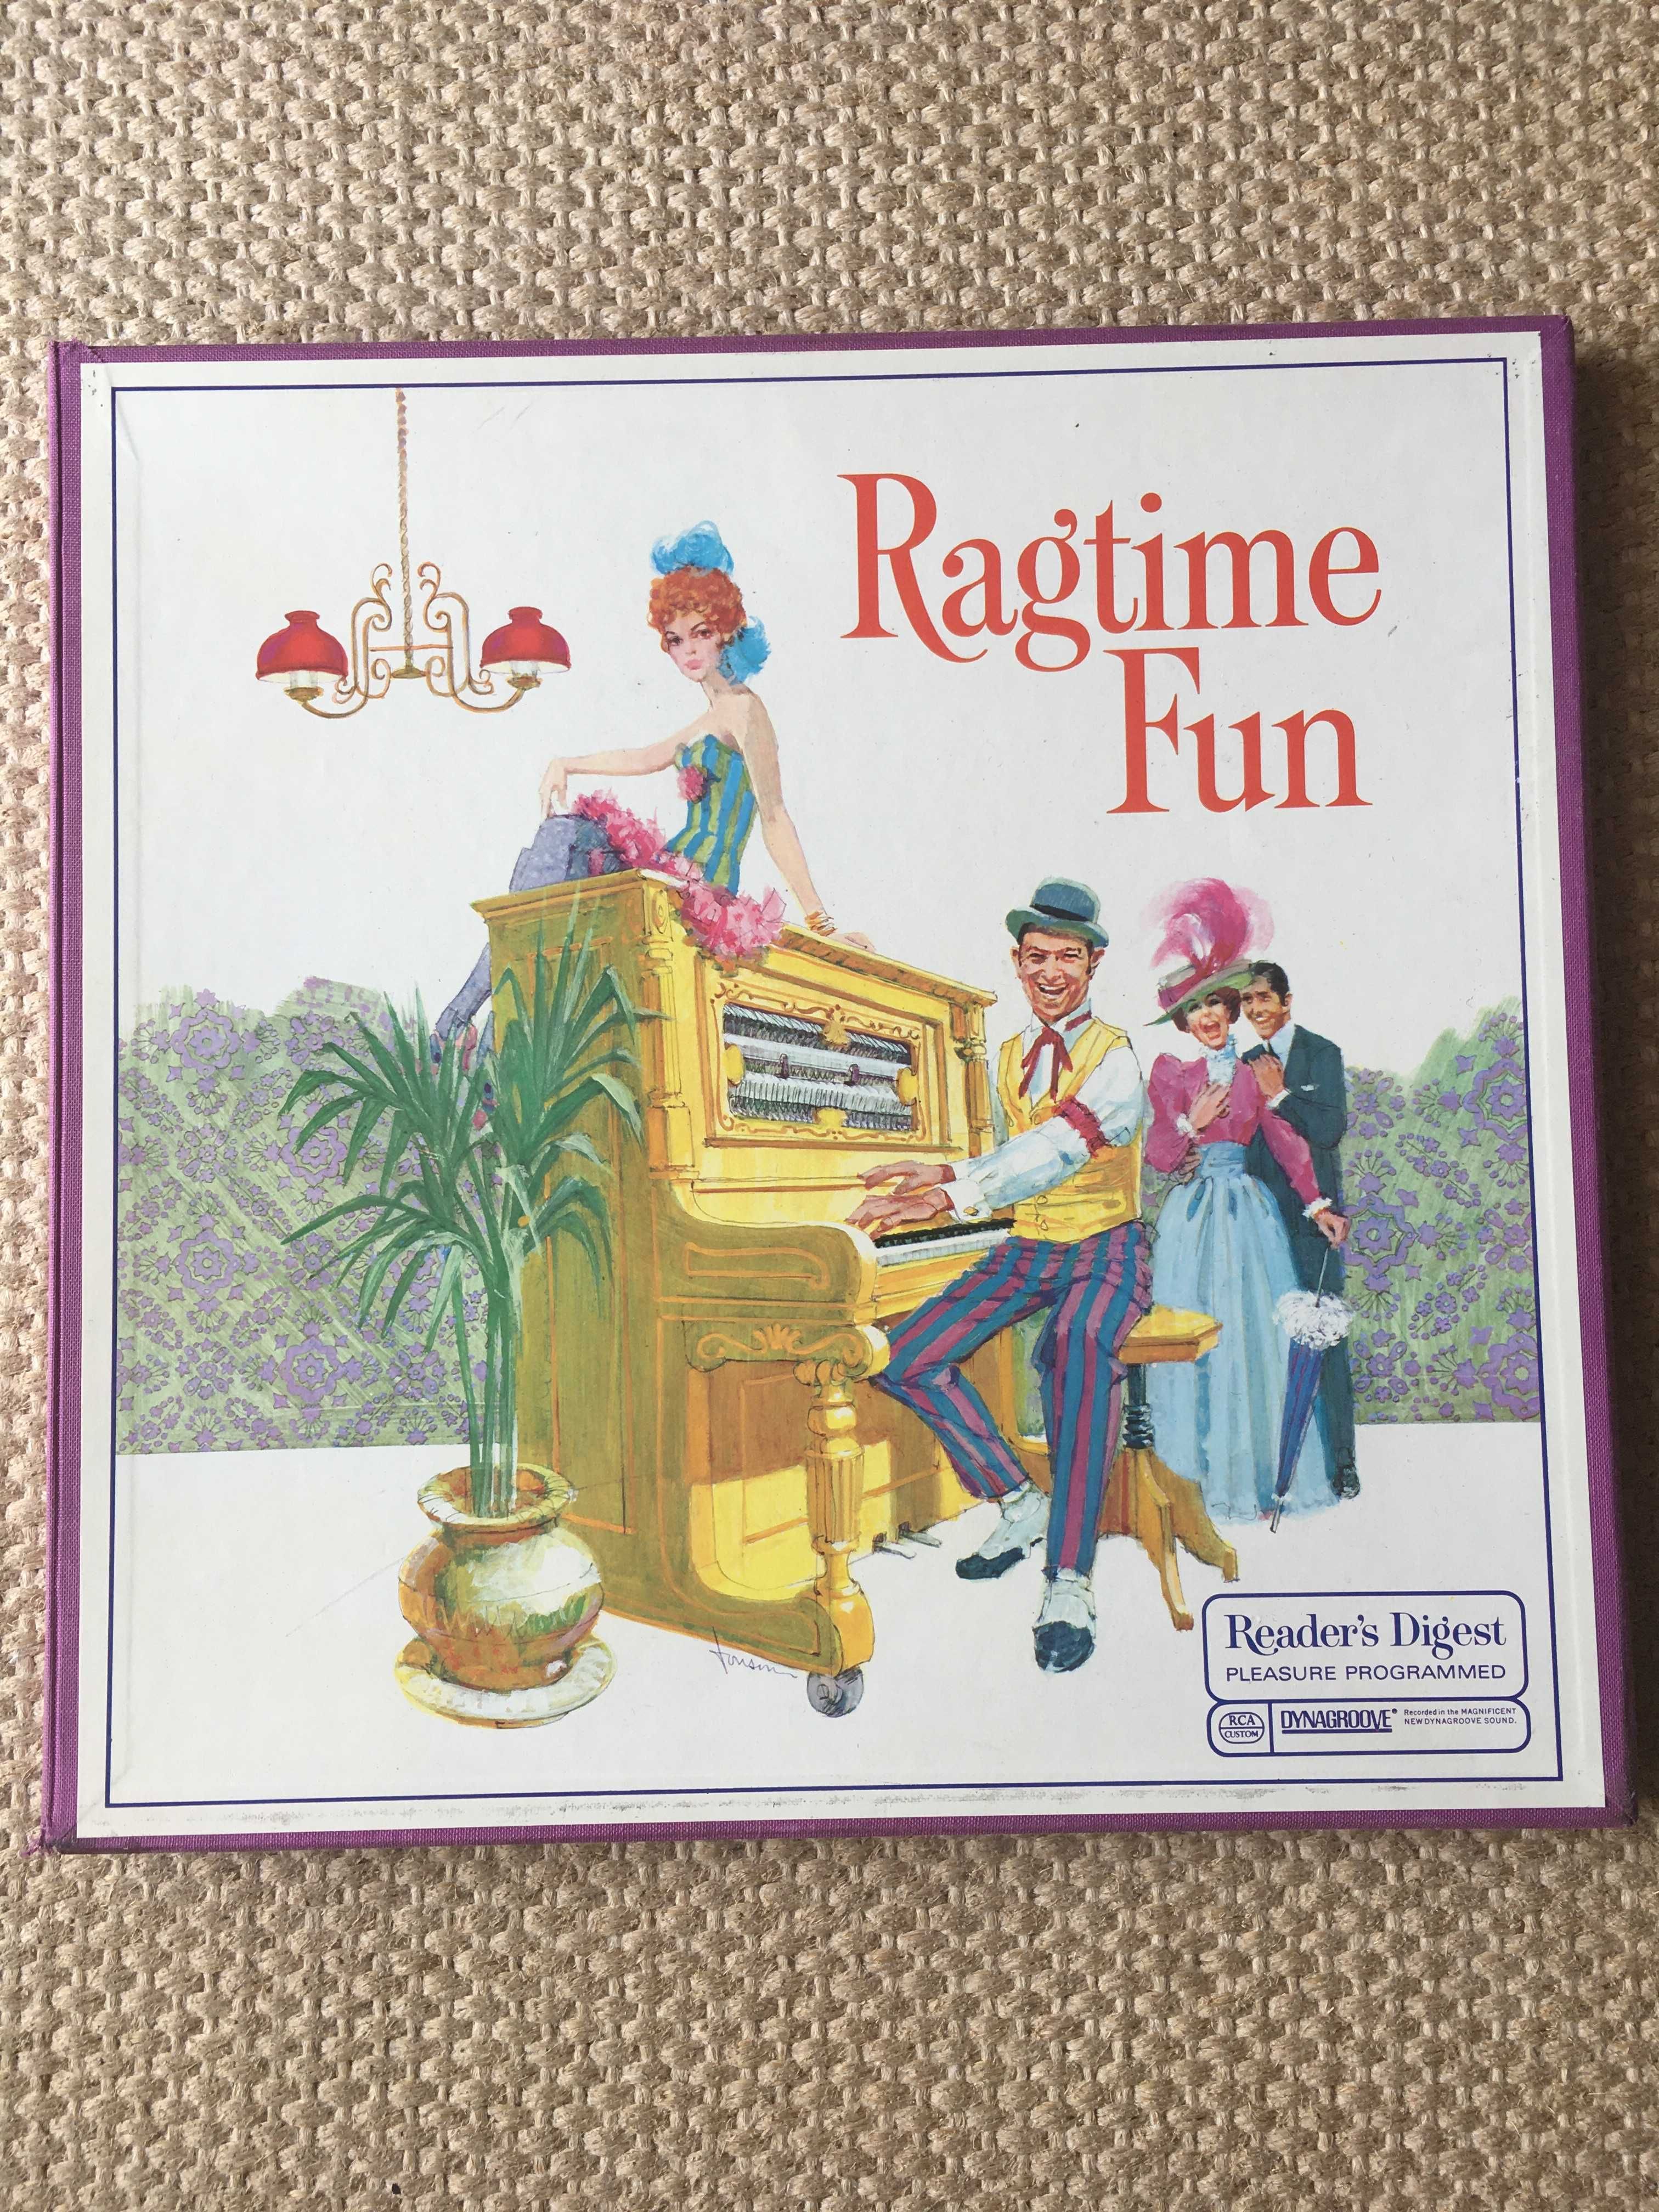 Discos Ragtime Fun Artistes Divers e The Strauss Family Cocert,